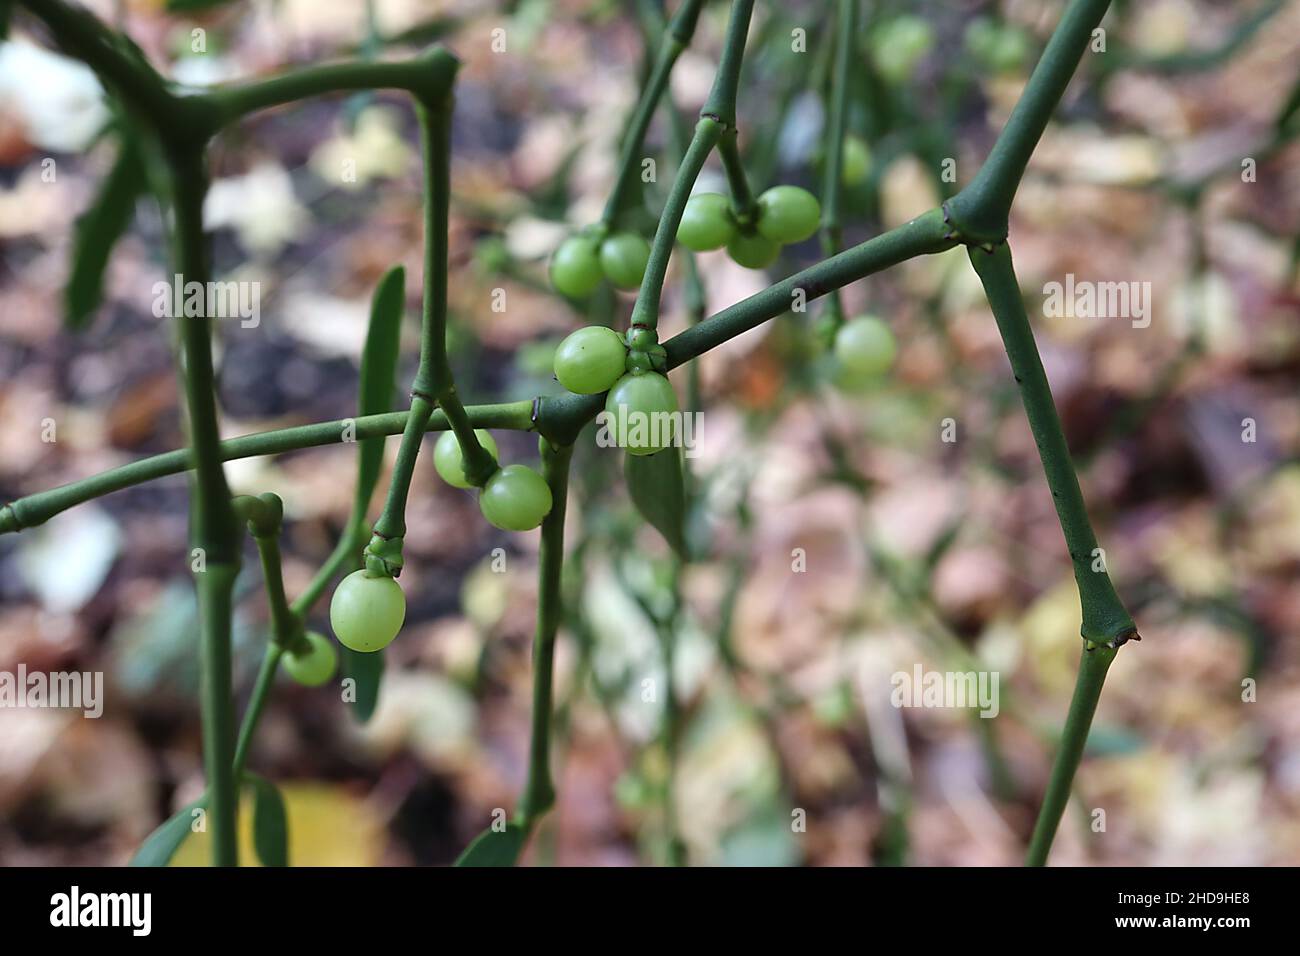 Viscum album  mistletoe – round light green berries and oblong mid green winged leaf pairs,  December, England, UK Stock Photo